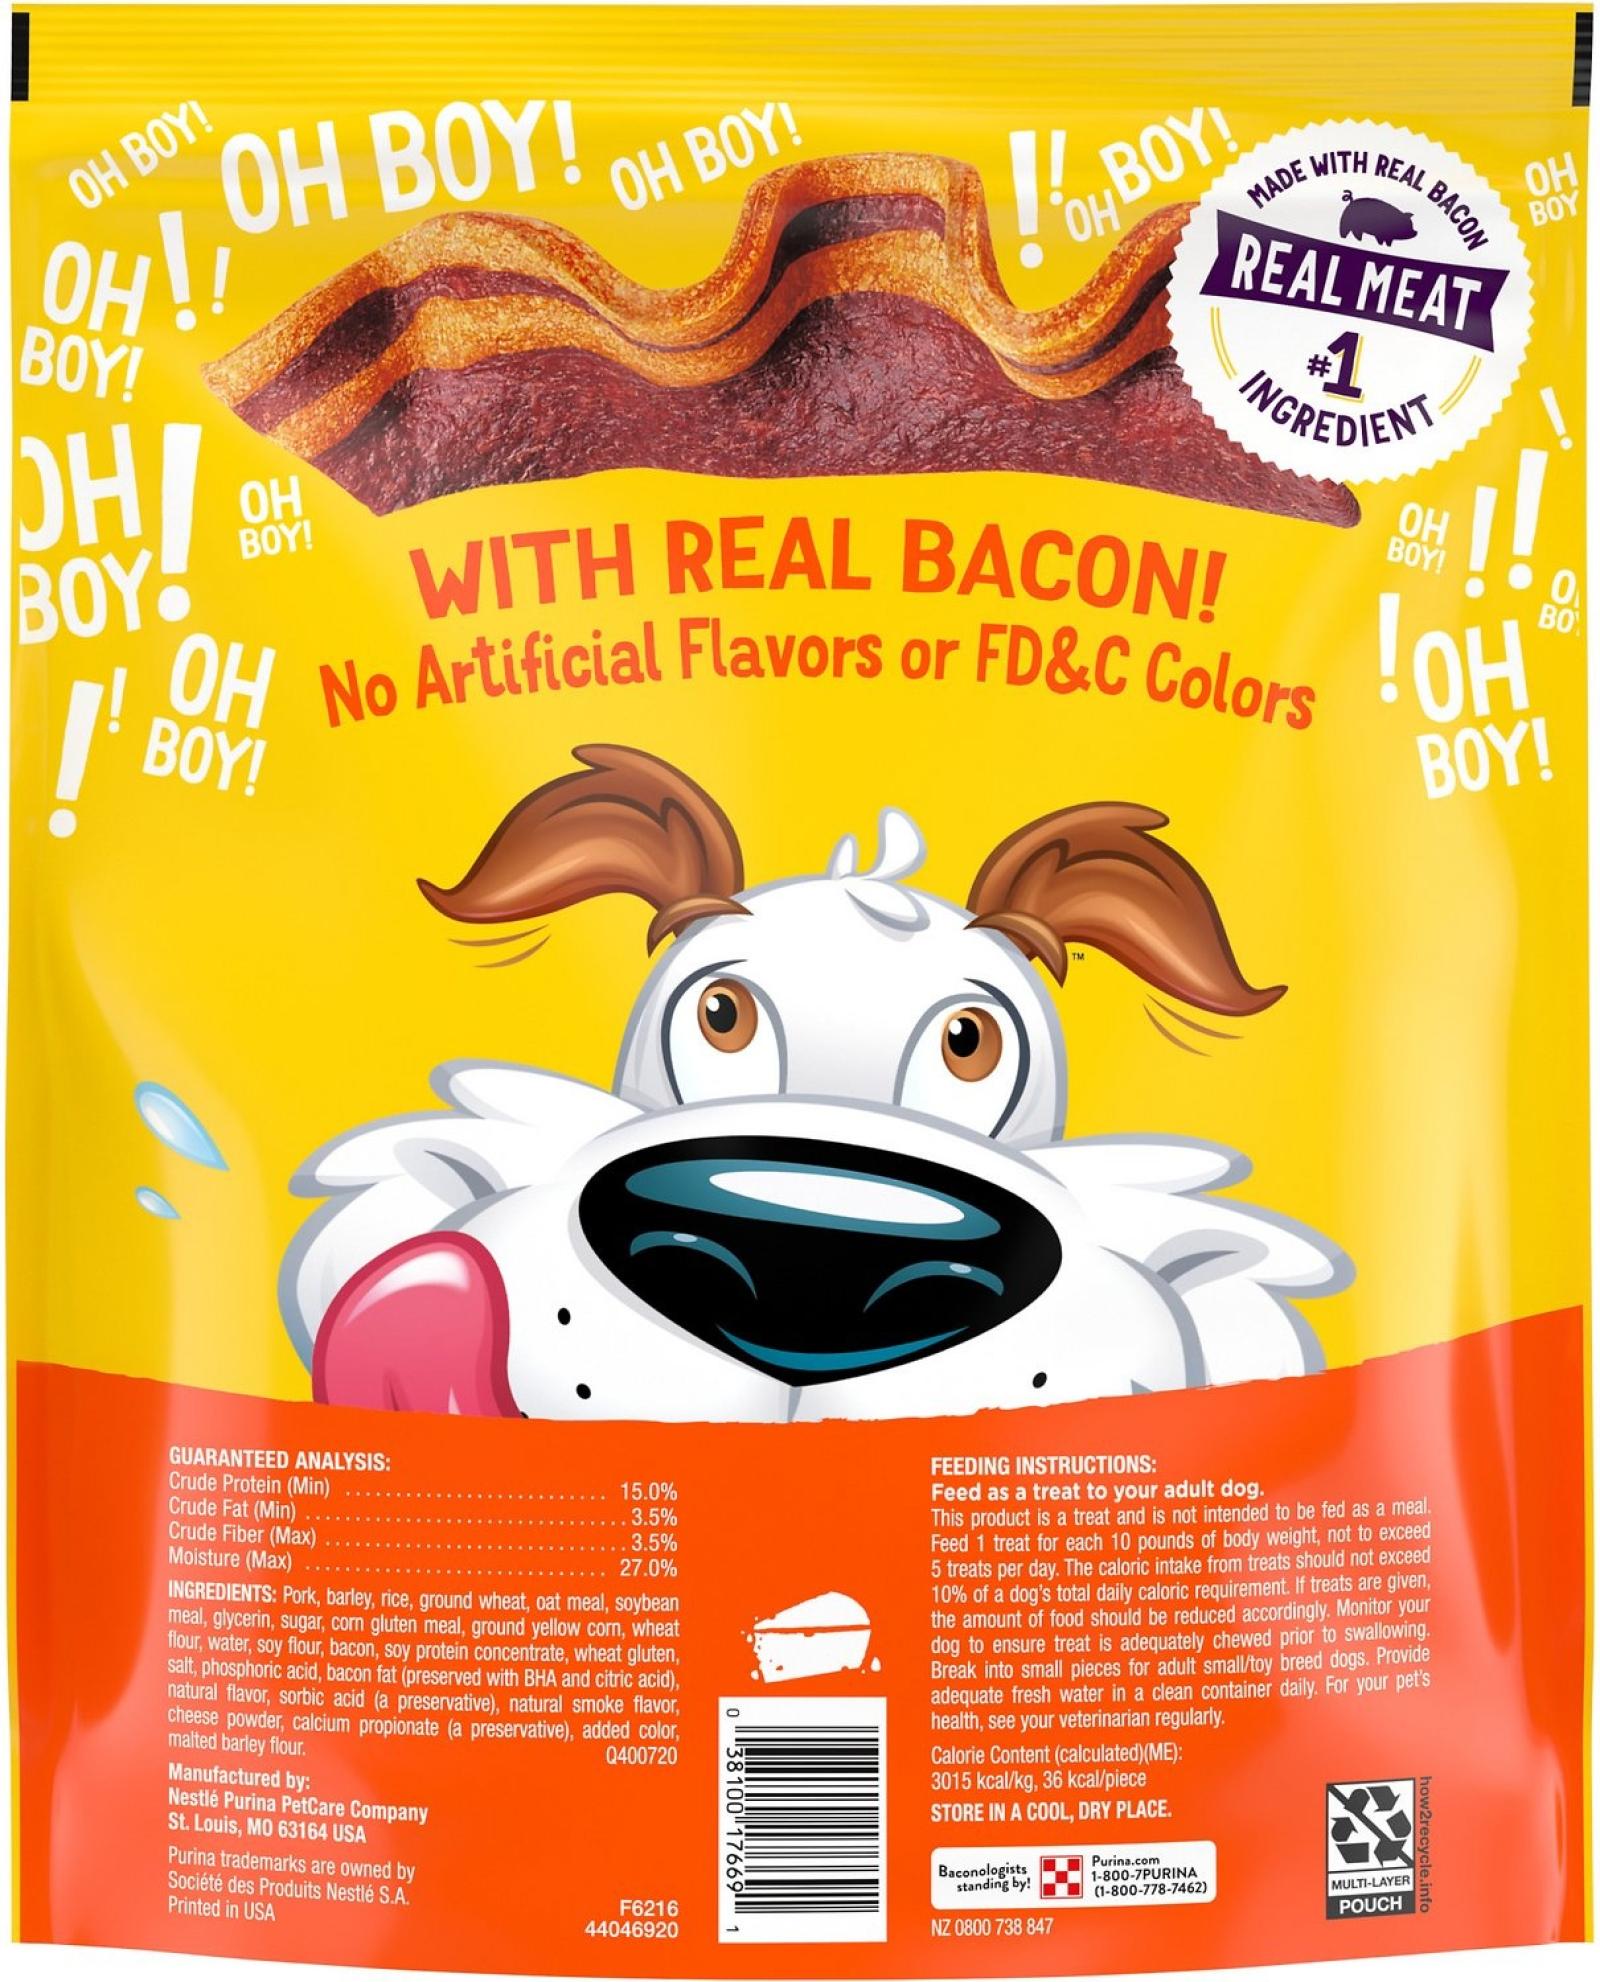 Purina Beggins Strips with Bacon & Cheese Flavor